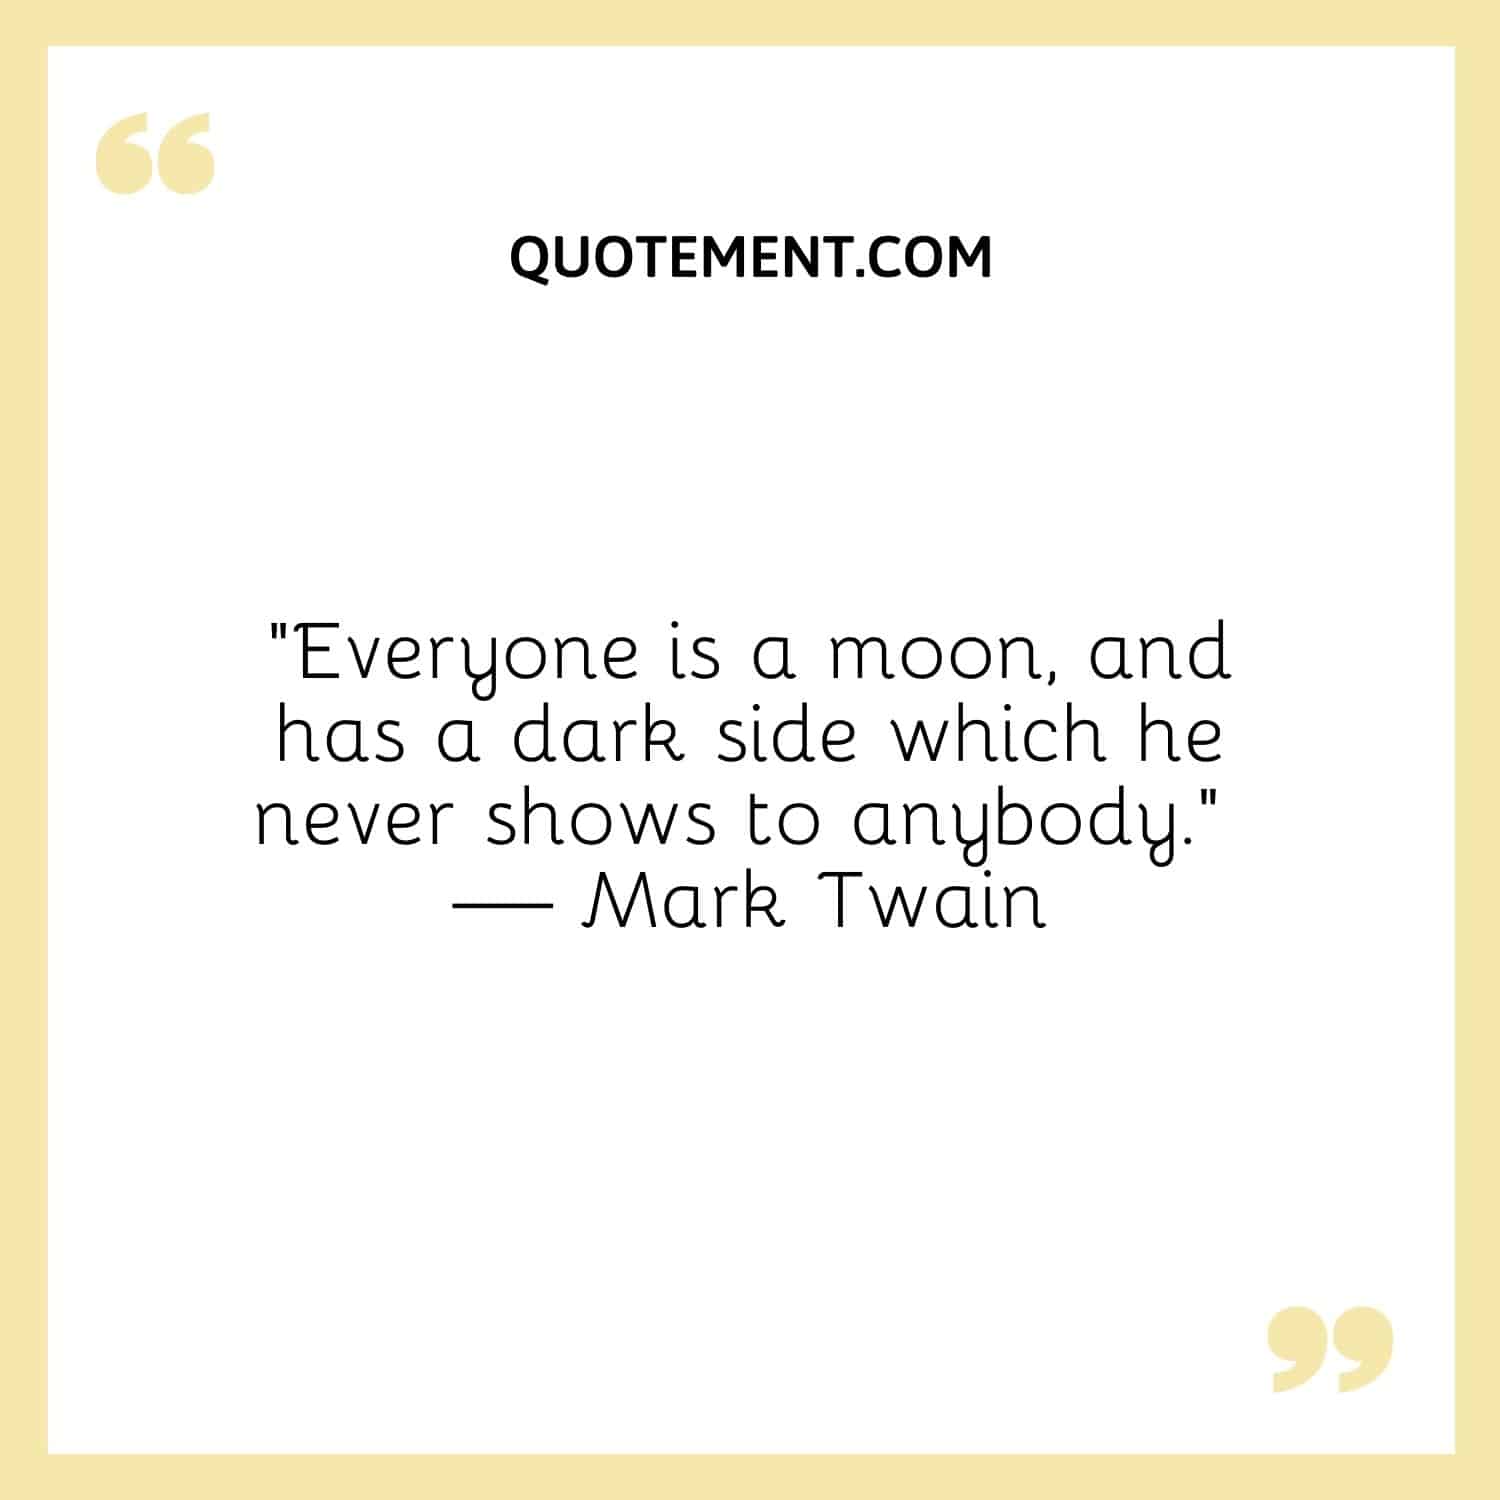 “Everyone is a moon, and has a dark side which he never shows to anybody.” — Mark Twain